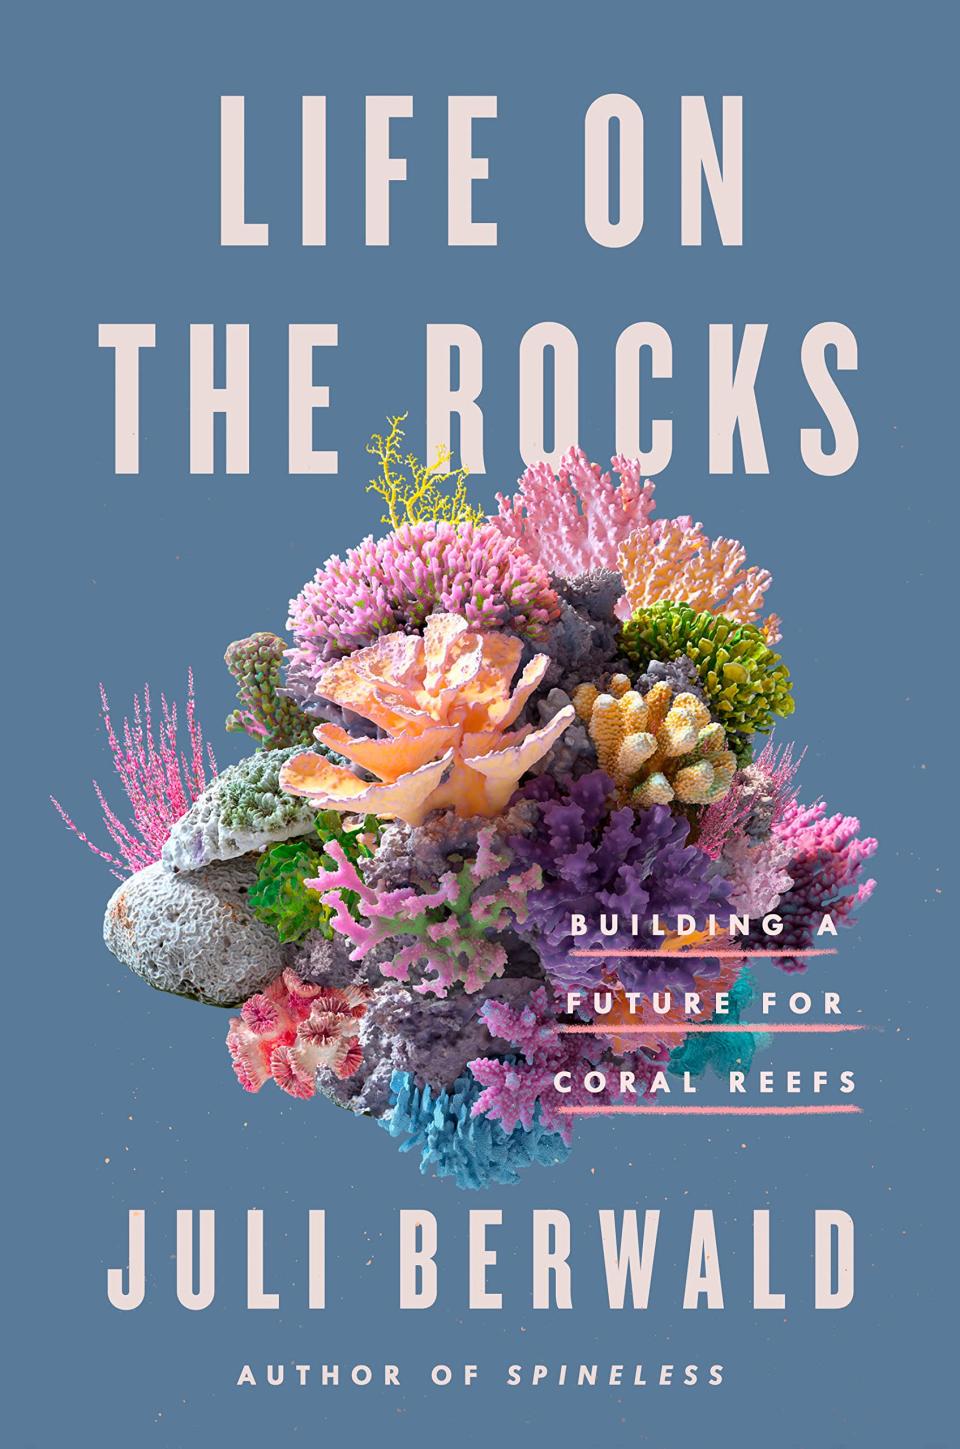 “Life on the Rocks: Building a Future for Coral Reefs,” by Juli Berwald